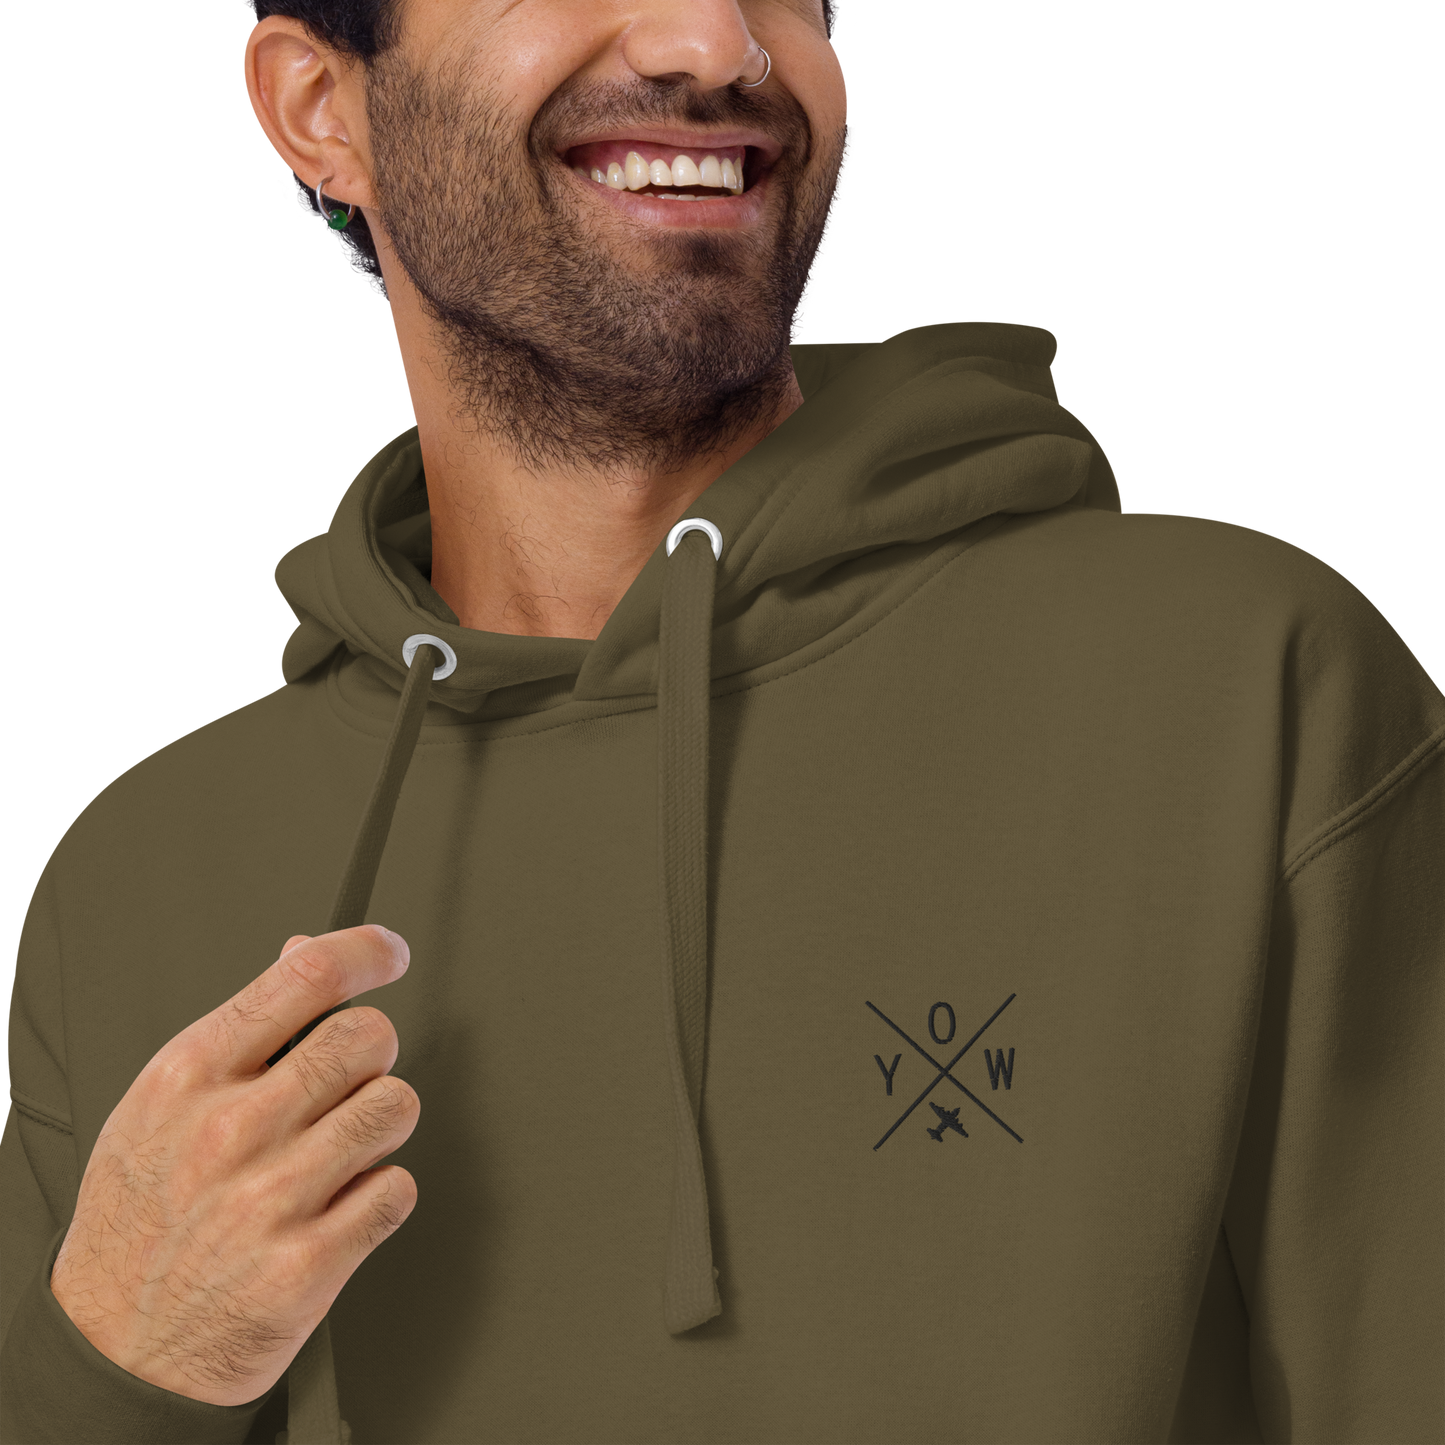 YHM Designs - YOW Ottawa Premium Hoodie - Crossed-X Design with Airport Code and Vintage Propliner - Black Embroidery - Image 13